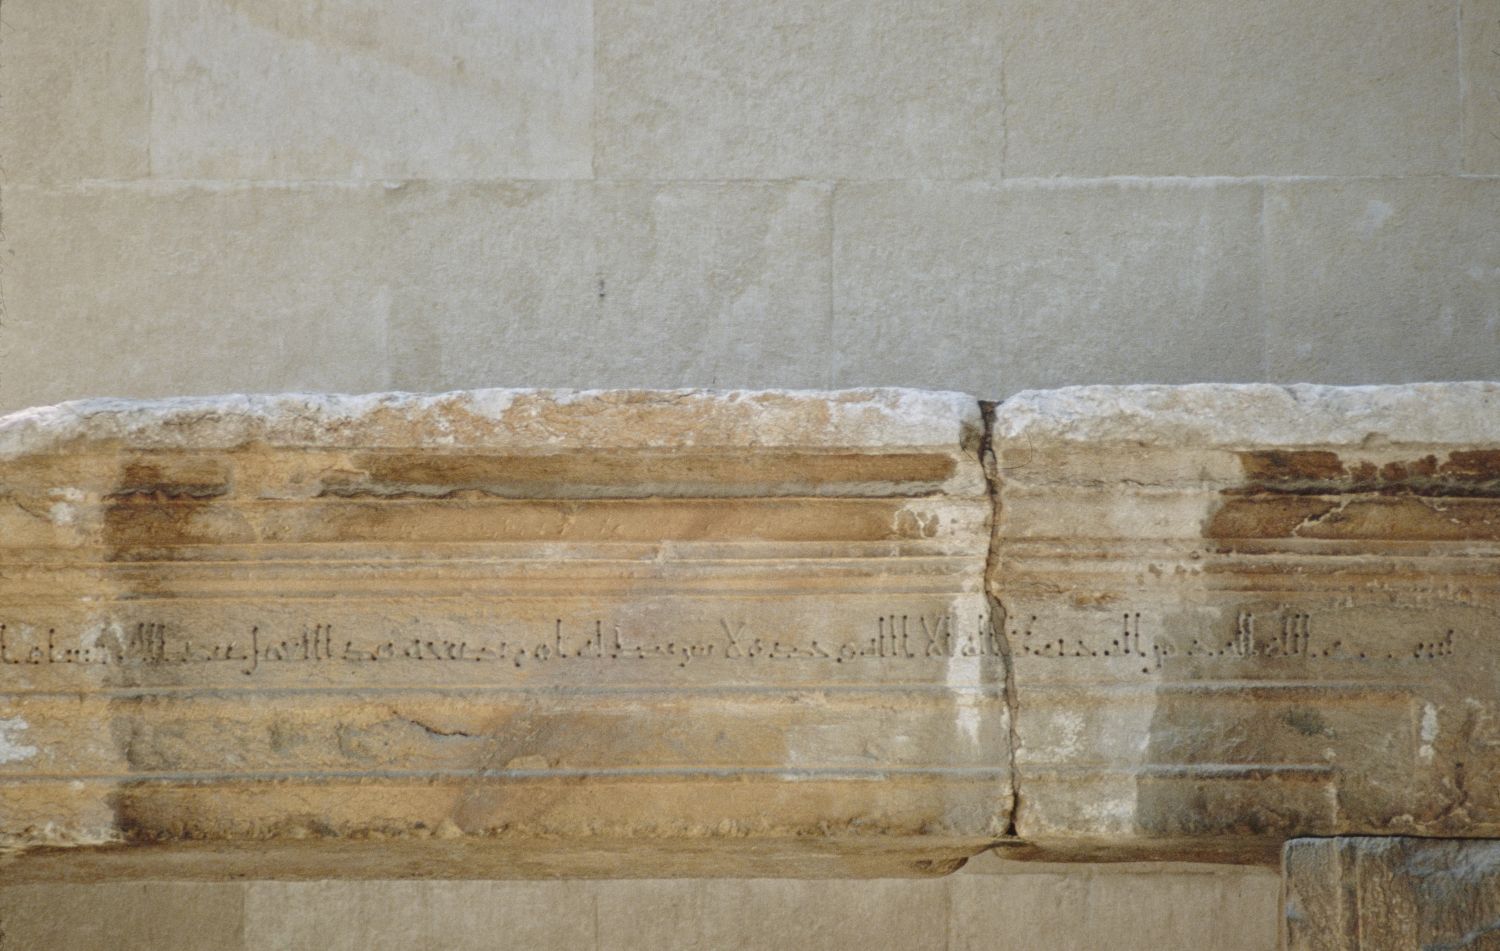 View of a lintel with the traces of a foundation inscription found at Qasr al-Hayr al-Gharbi, displayed at the National Museum, Damascus.